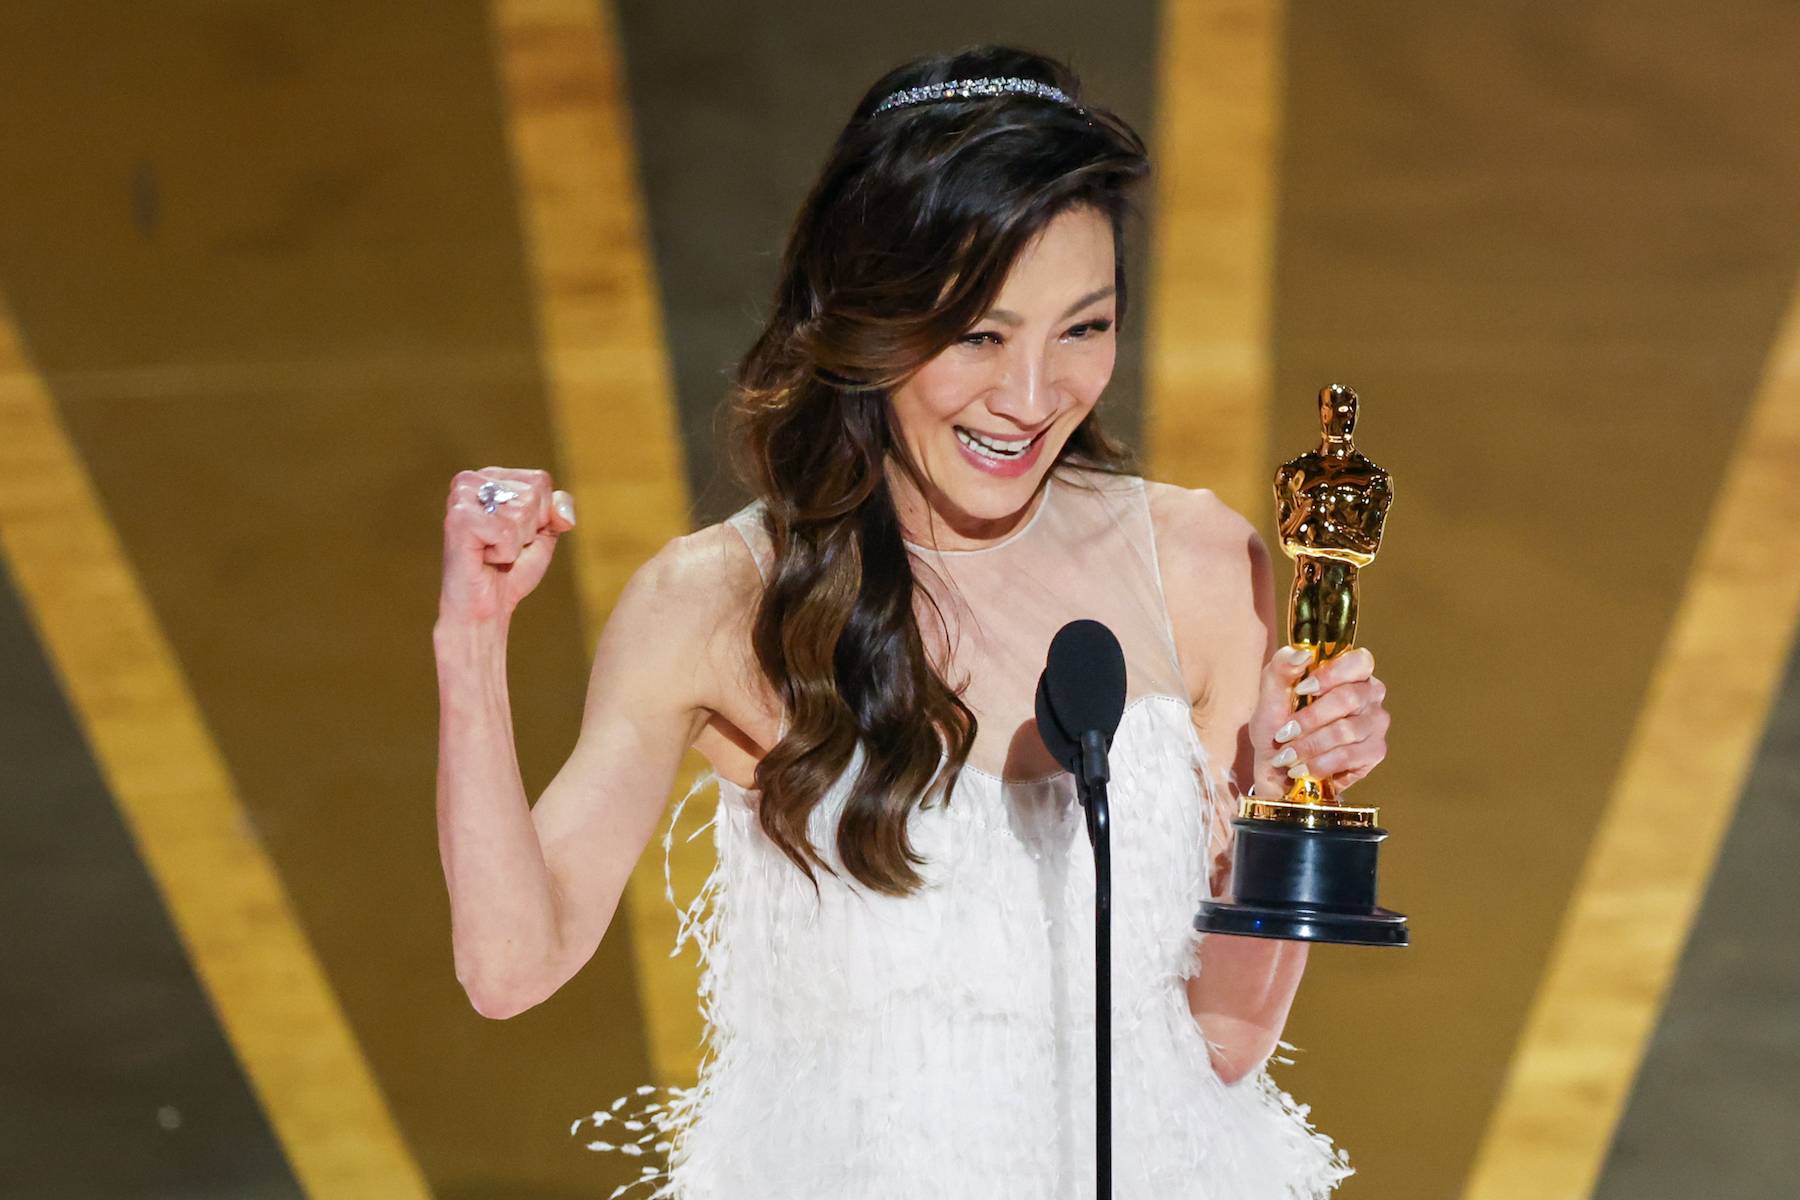 Michelle Yeoh accepting Oscar for Best Actress at 2023 Academy Awards.